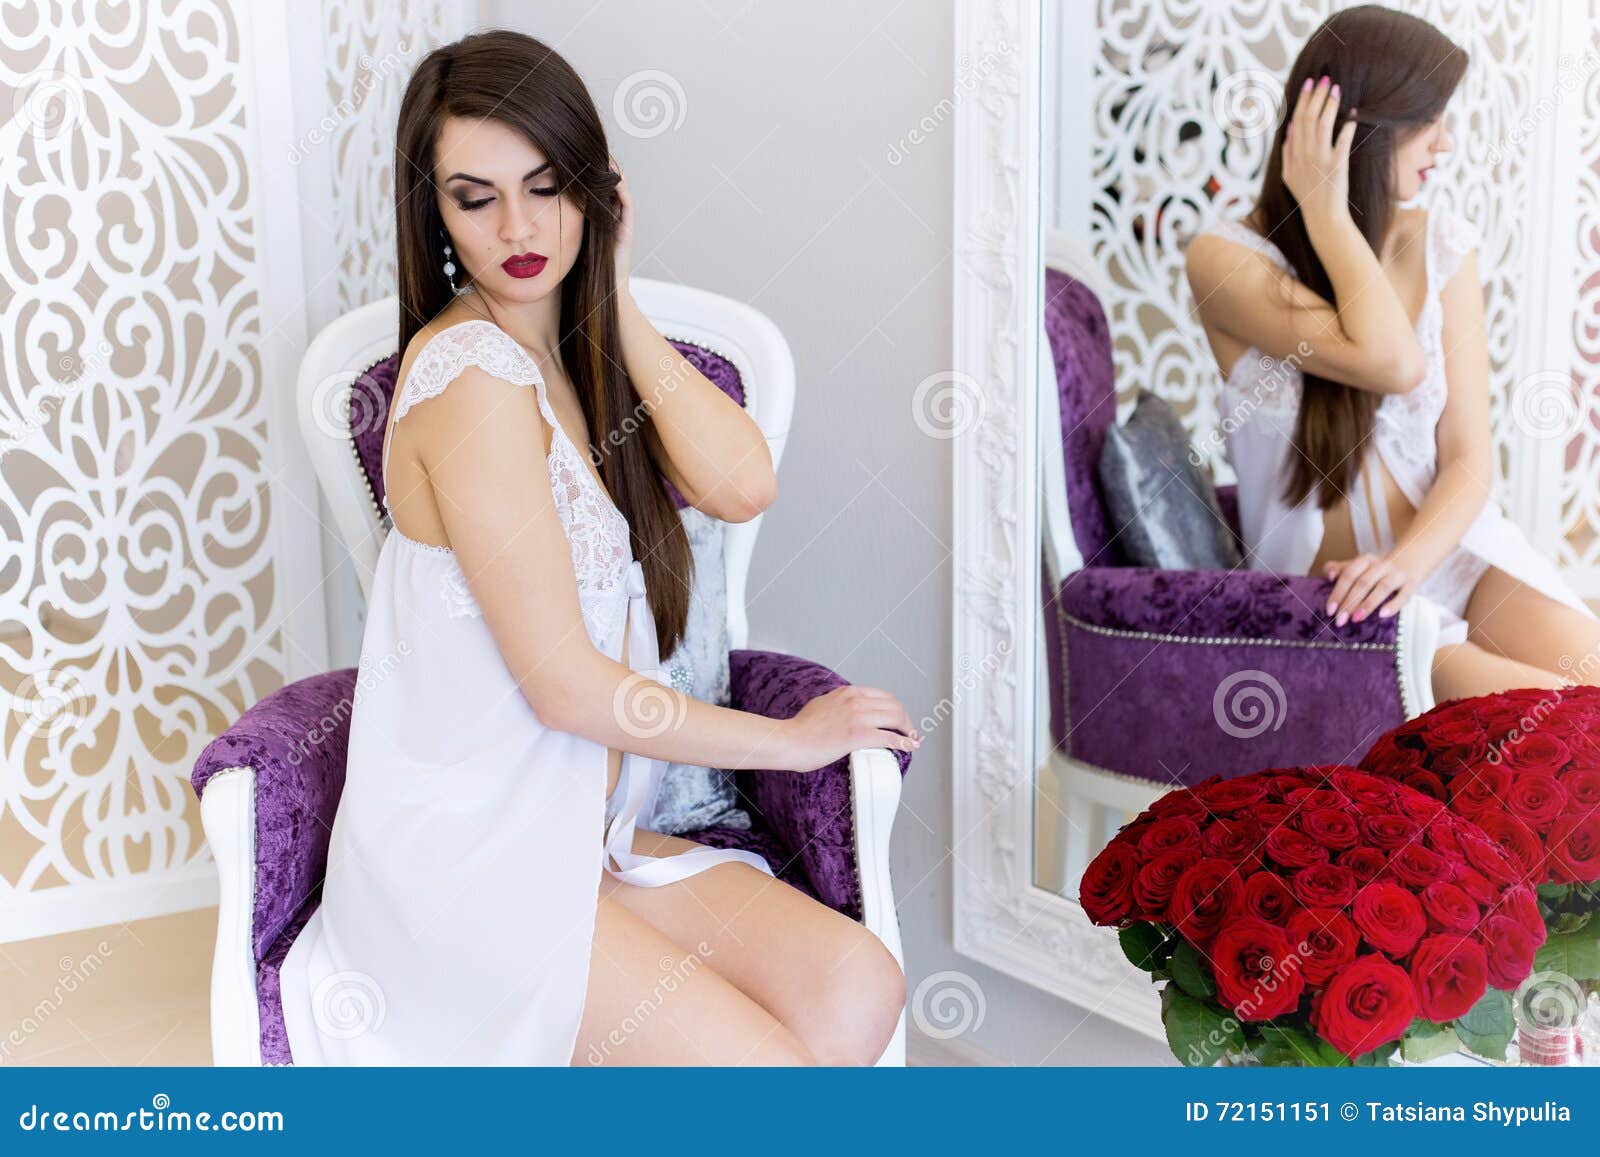 Aggregate more than 88 white frock with red roses super hot - POPPY